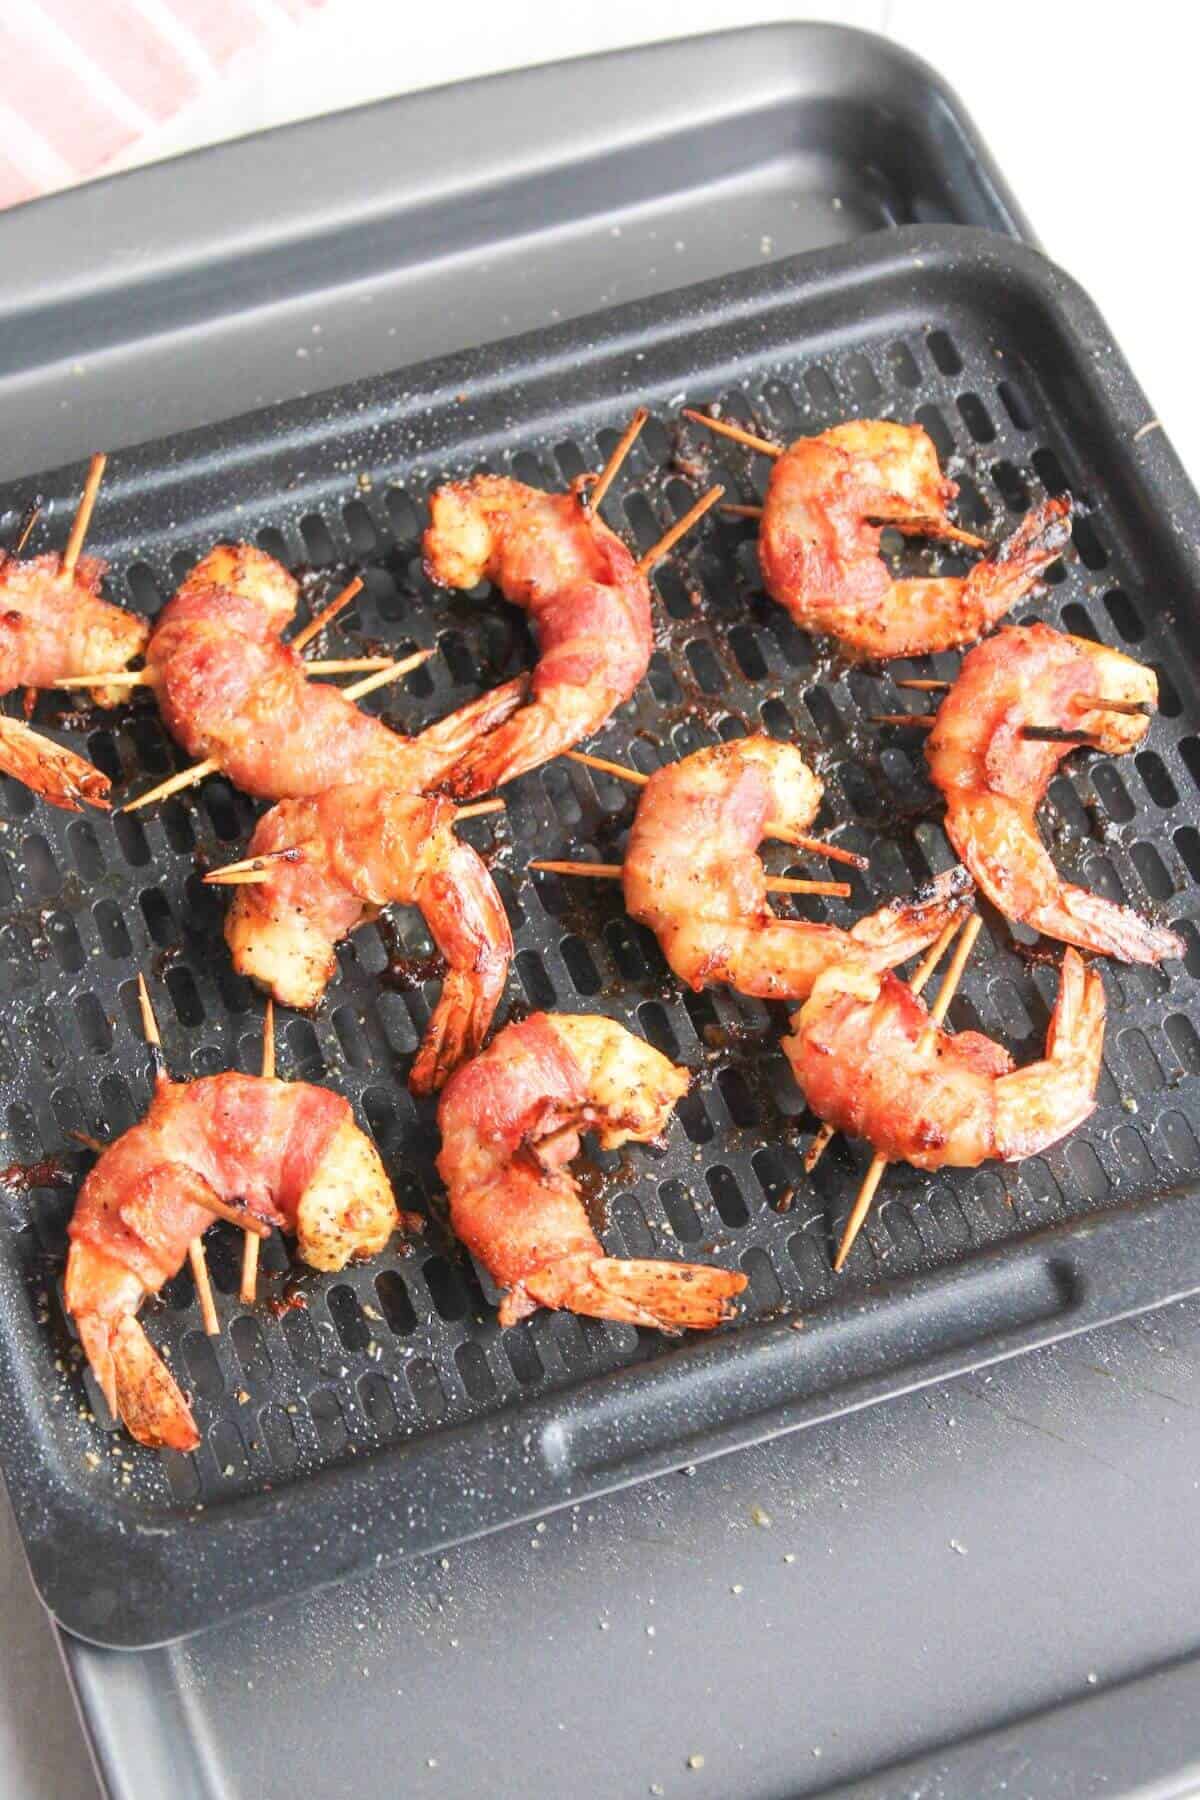 Bacon wrapped shrimp on an air fryer tray.